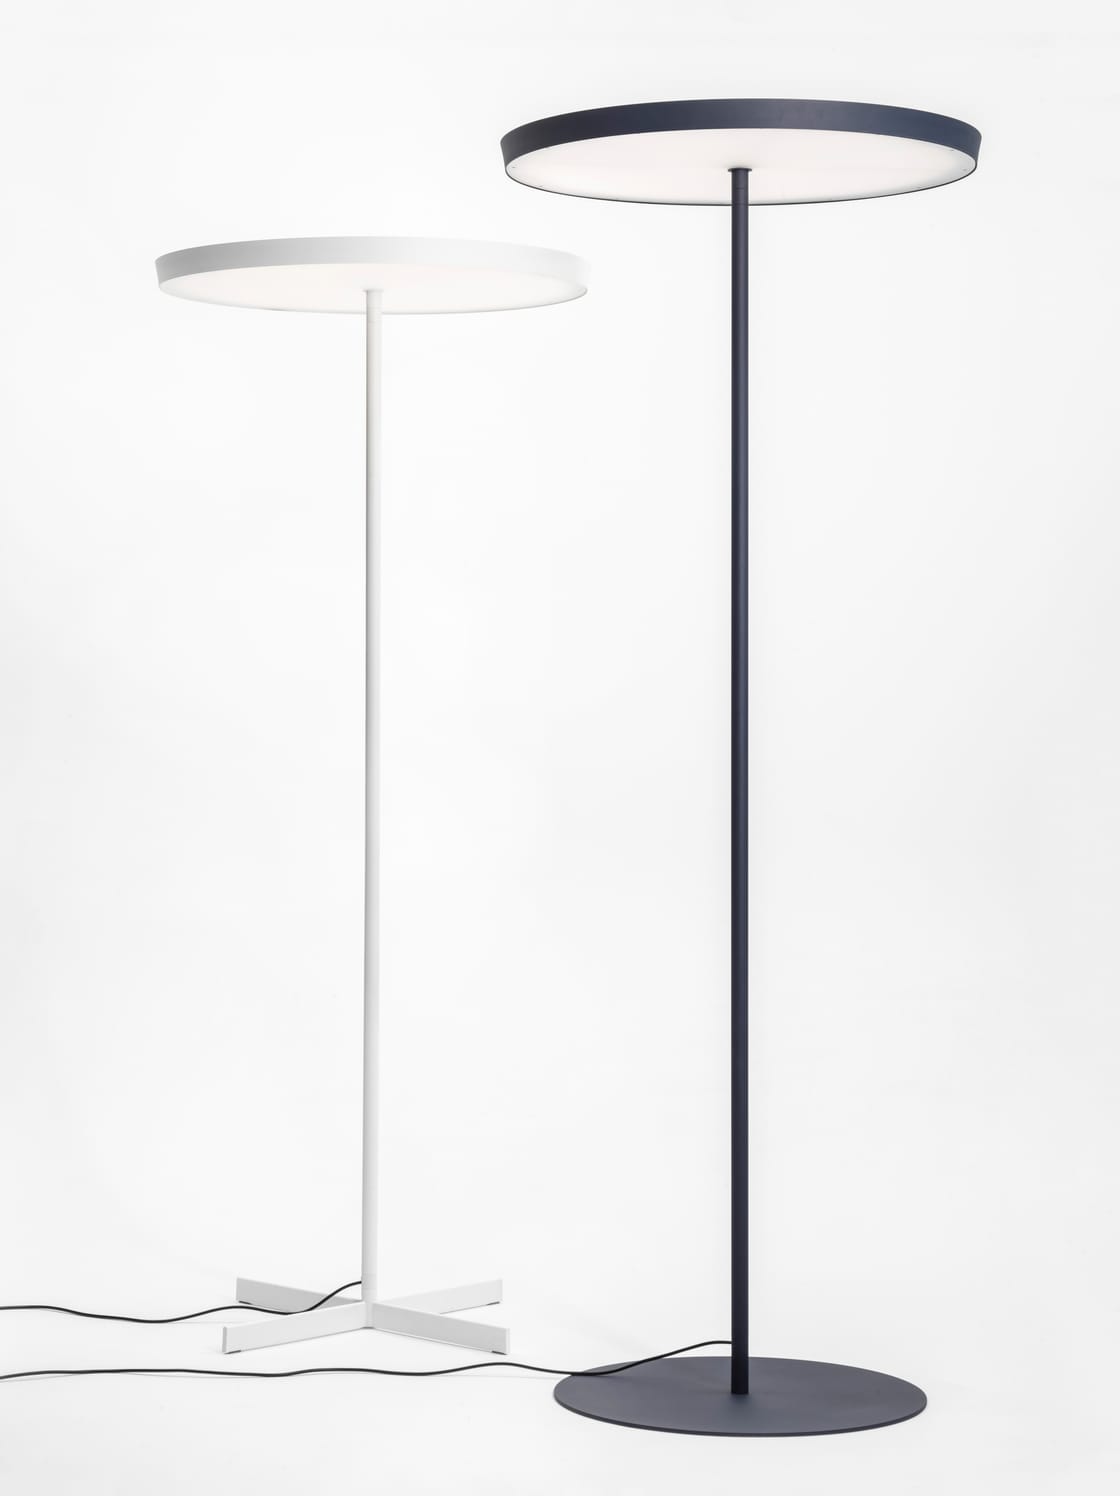 CIRCULAR F 900 floor standing lamp for large workplaces